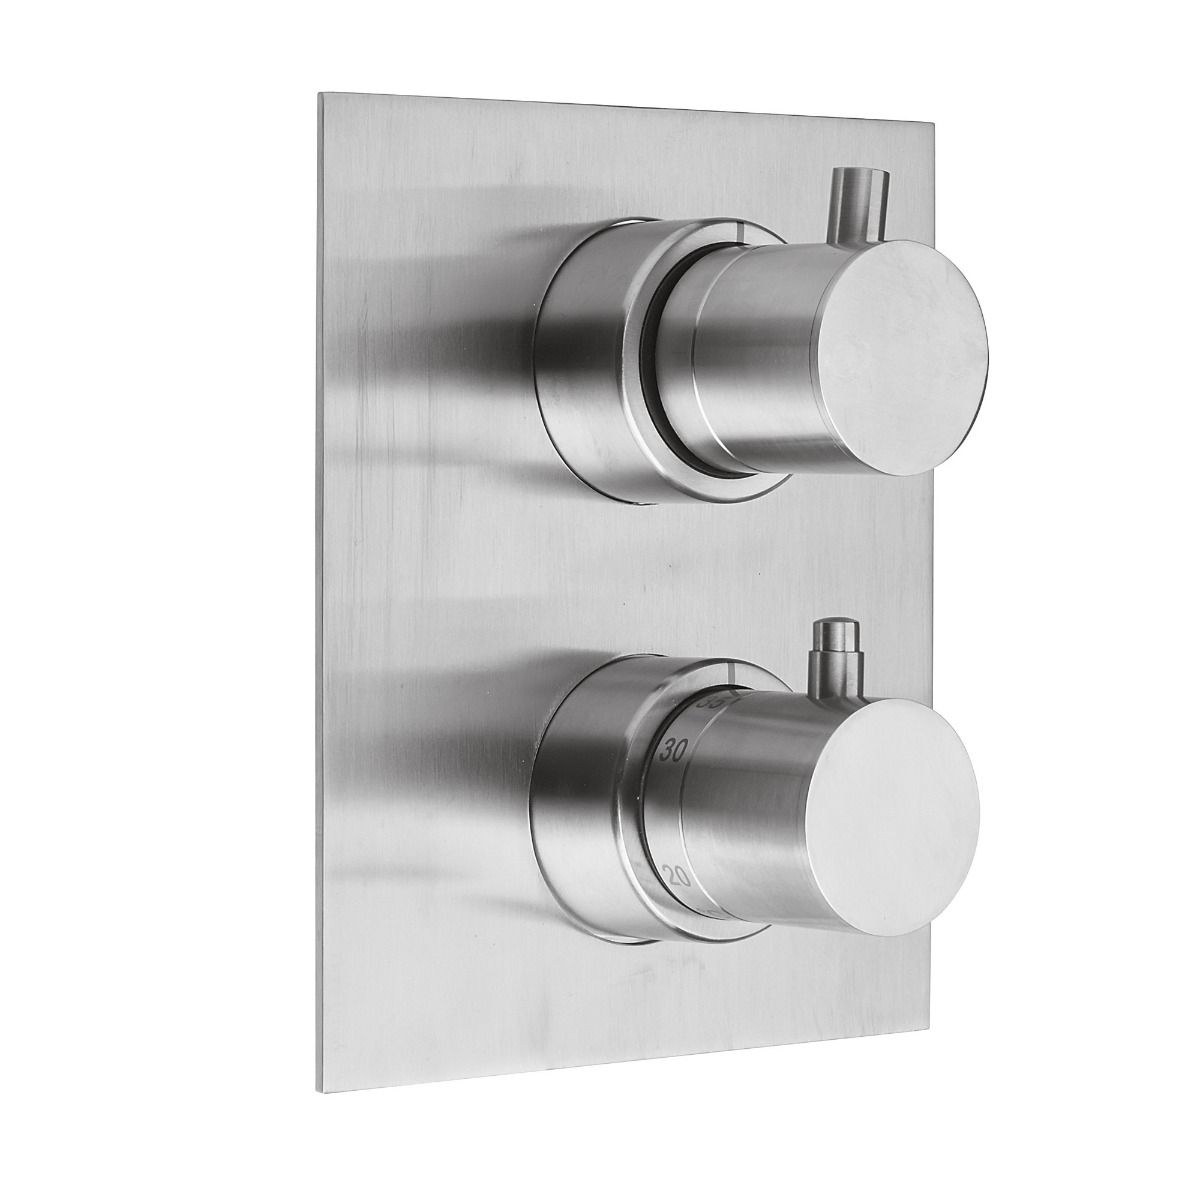 Concealed Dual Control Shower